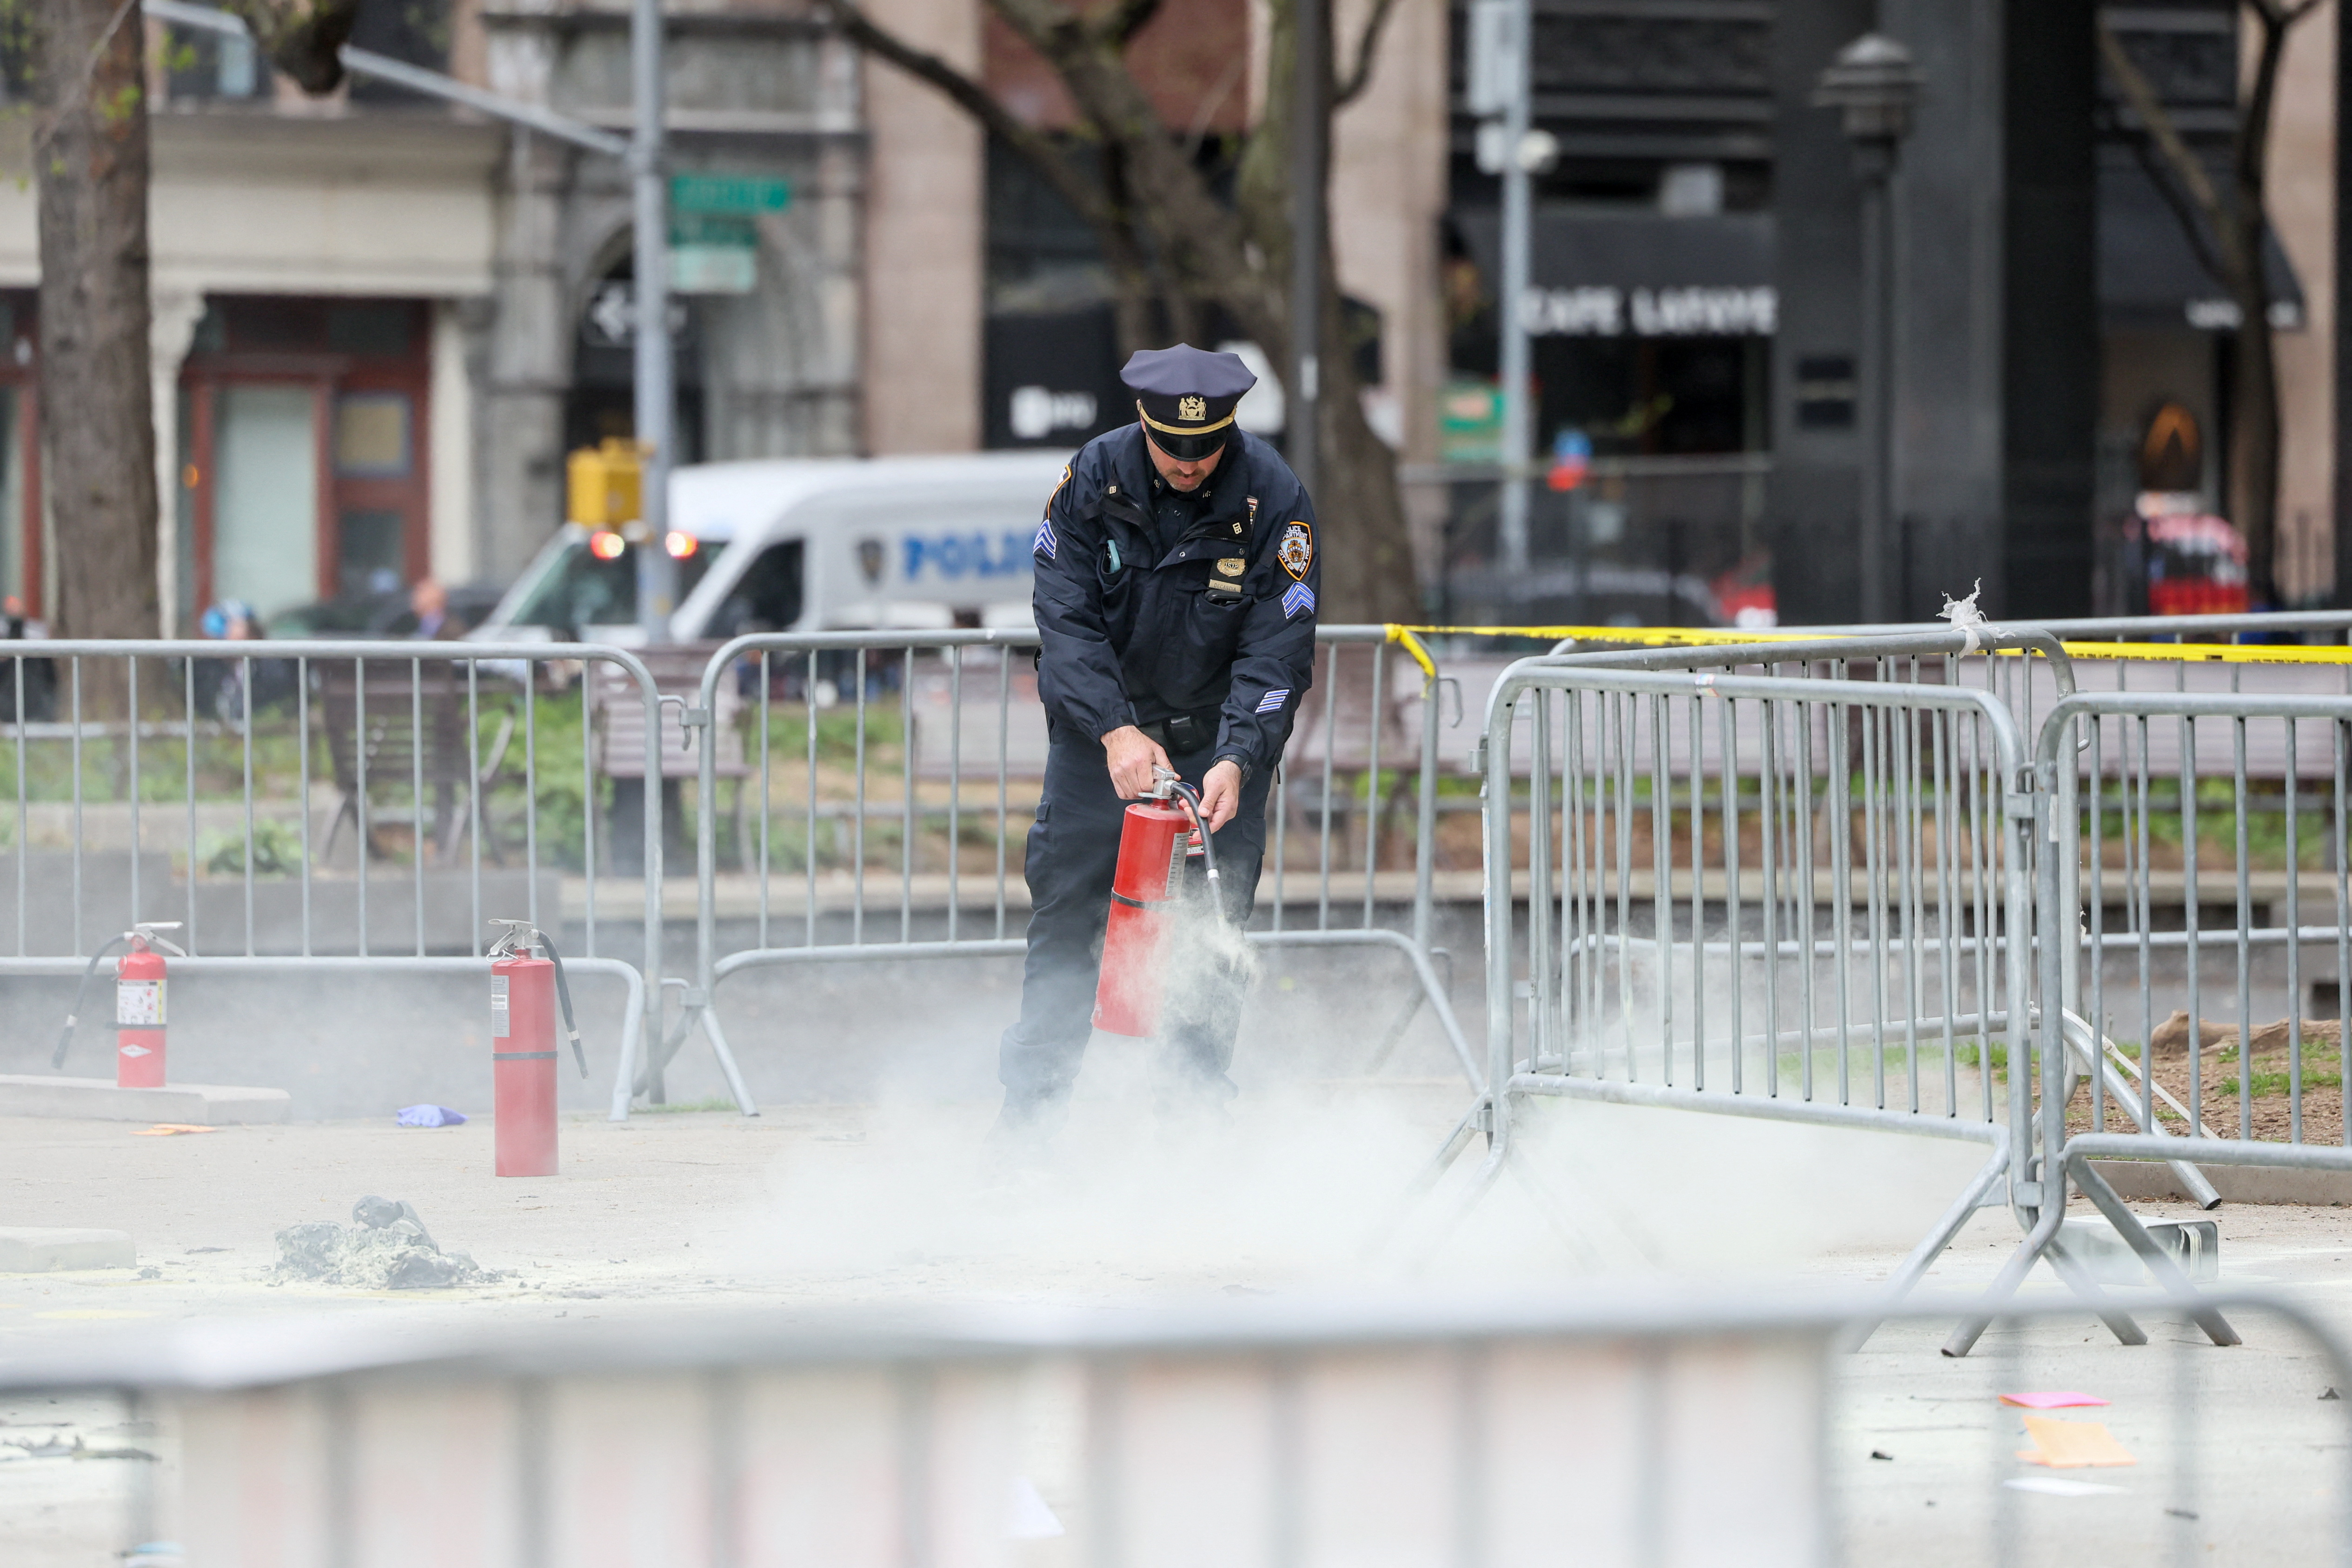 Aftermath of a person covered in flames outside NY courthouse of former U.S. President Trump's criminal hush money trial